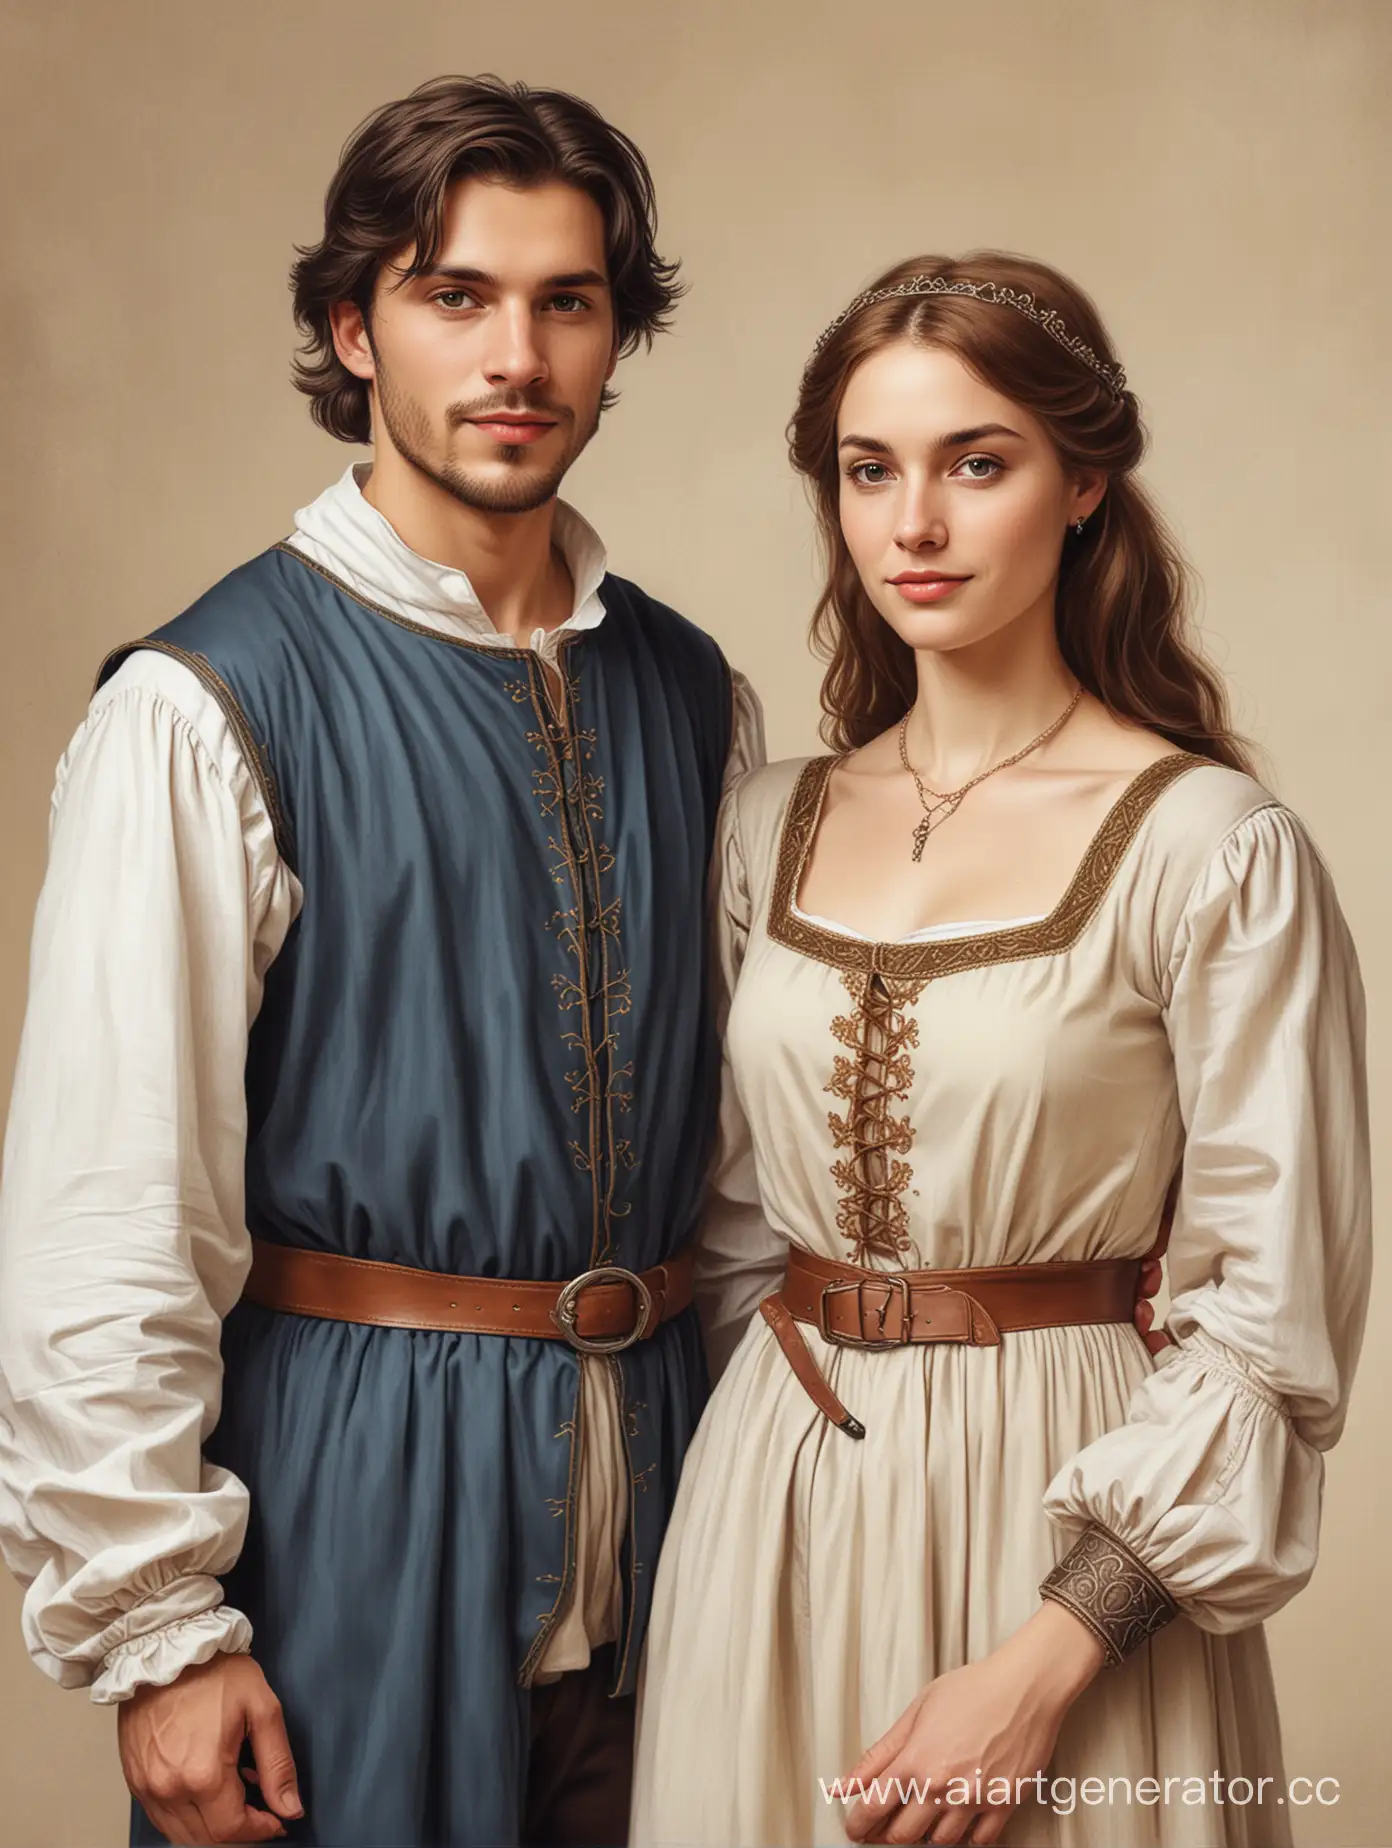 Relaxed-Twins-in-Simple-Medieval-Costume